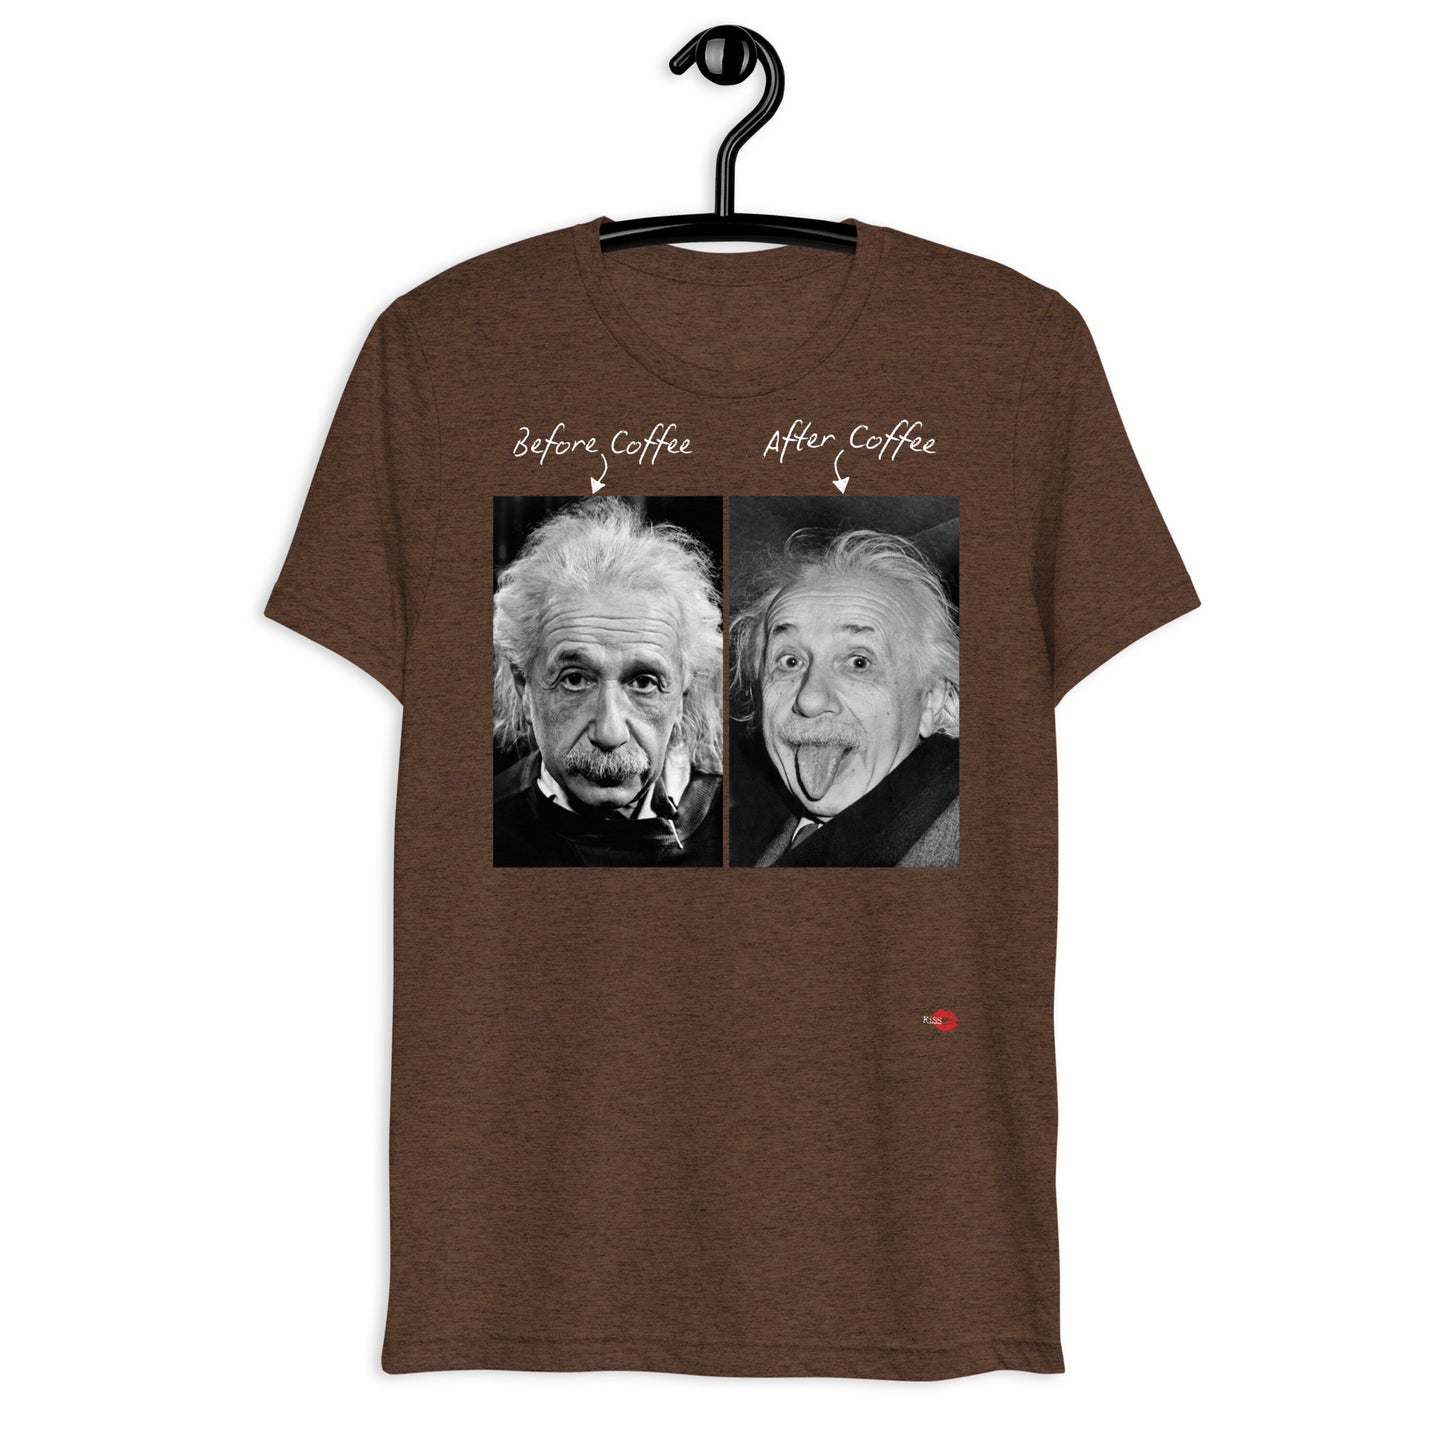 Albert Einstein Coffee KiSS Short sleeve t-shirt - Funny before and after